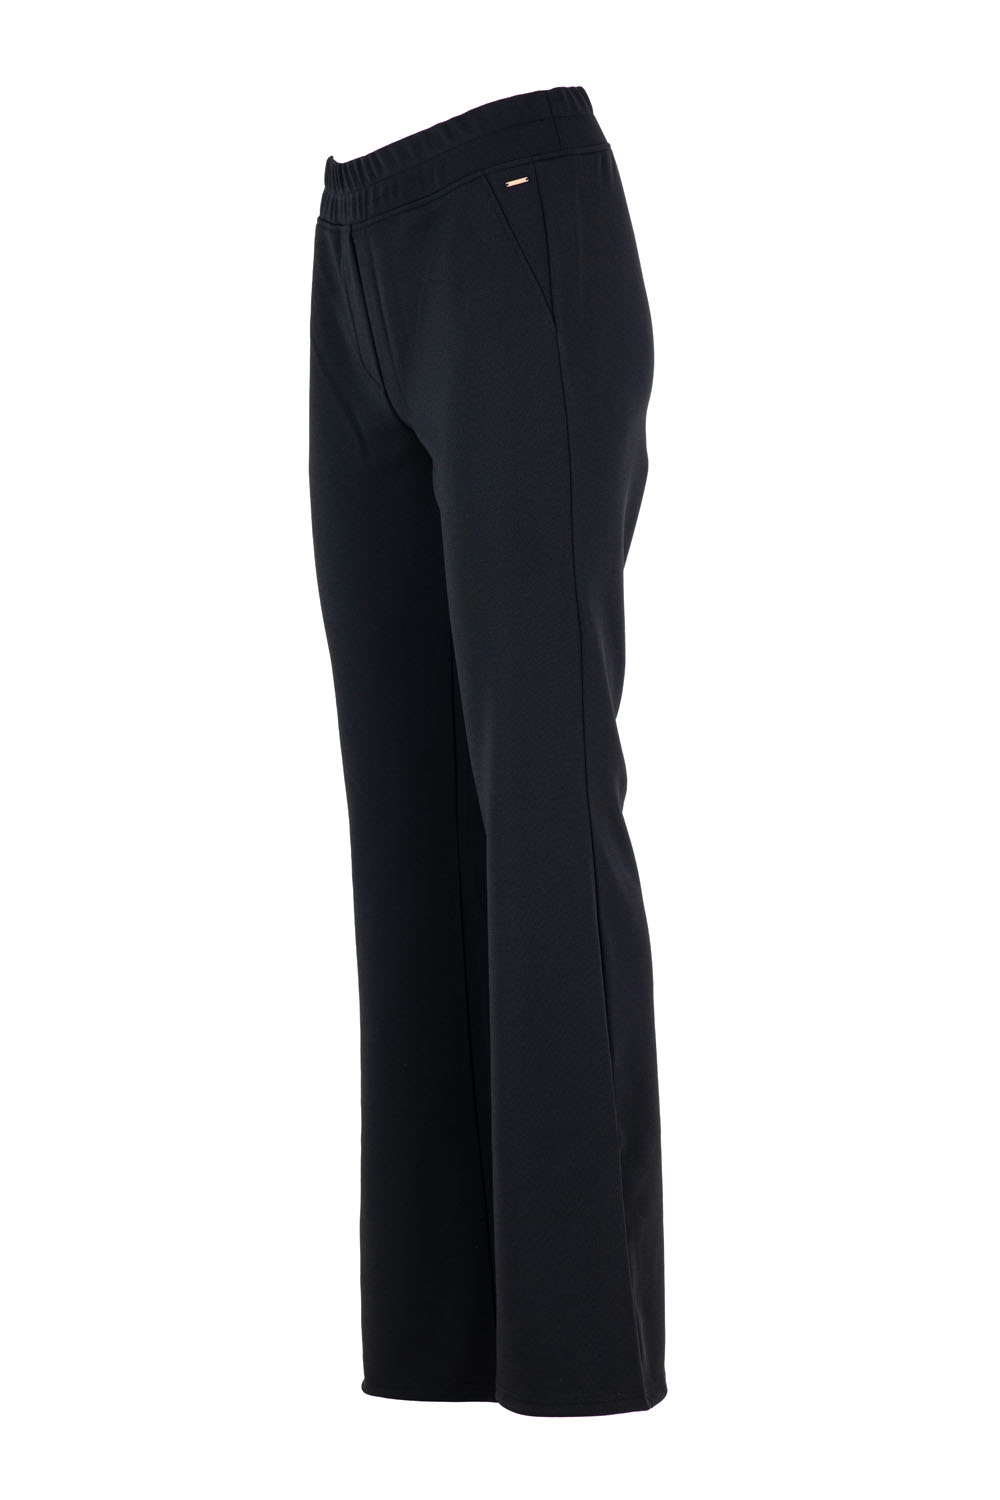 Stretchy Flare Soft Trousers with Elasticated Waistband